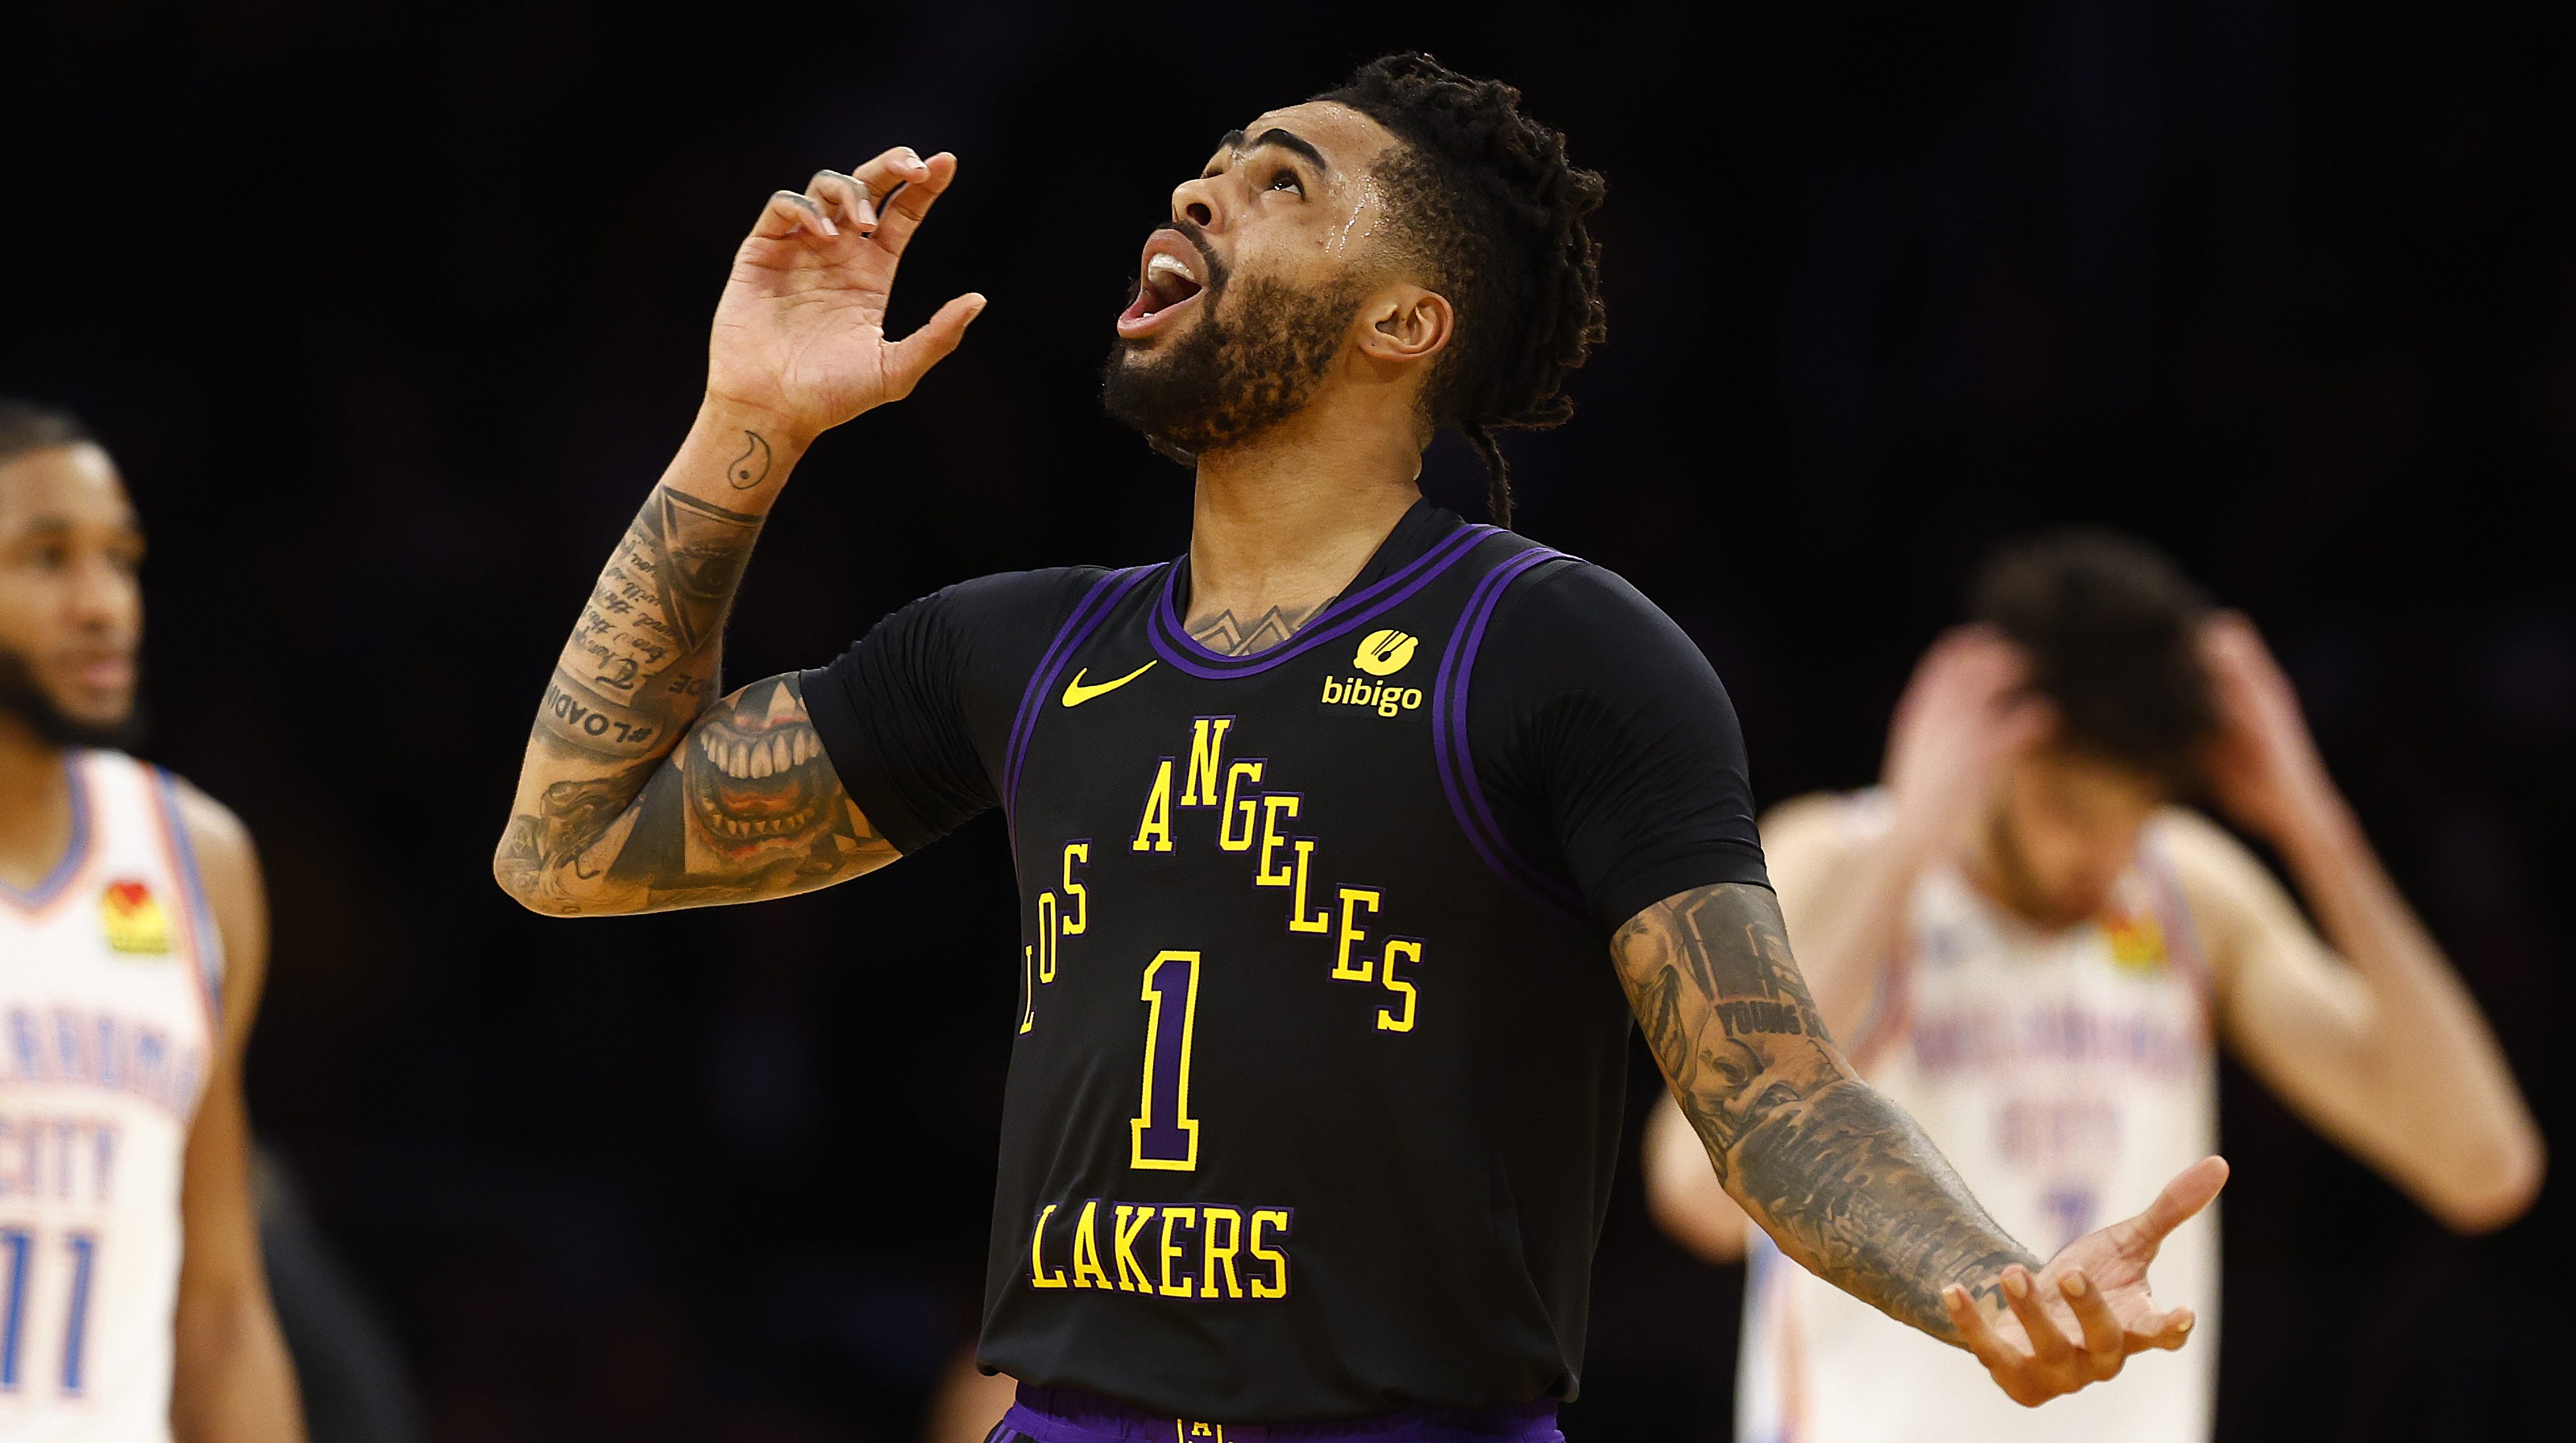 Proposed 4-Team Trade Sends Lakers 4-Player Package With Former All-Star